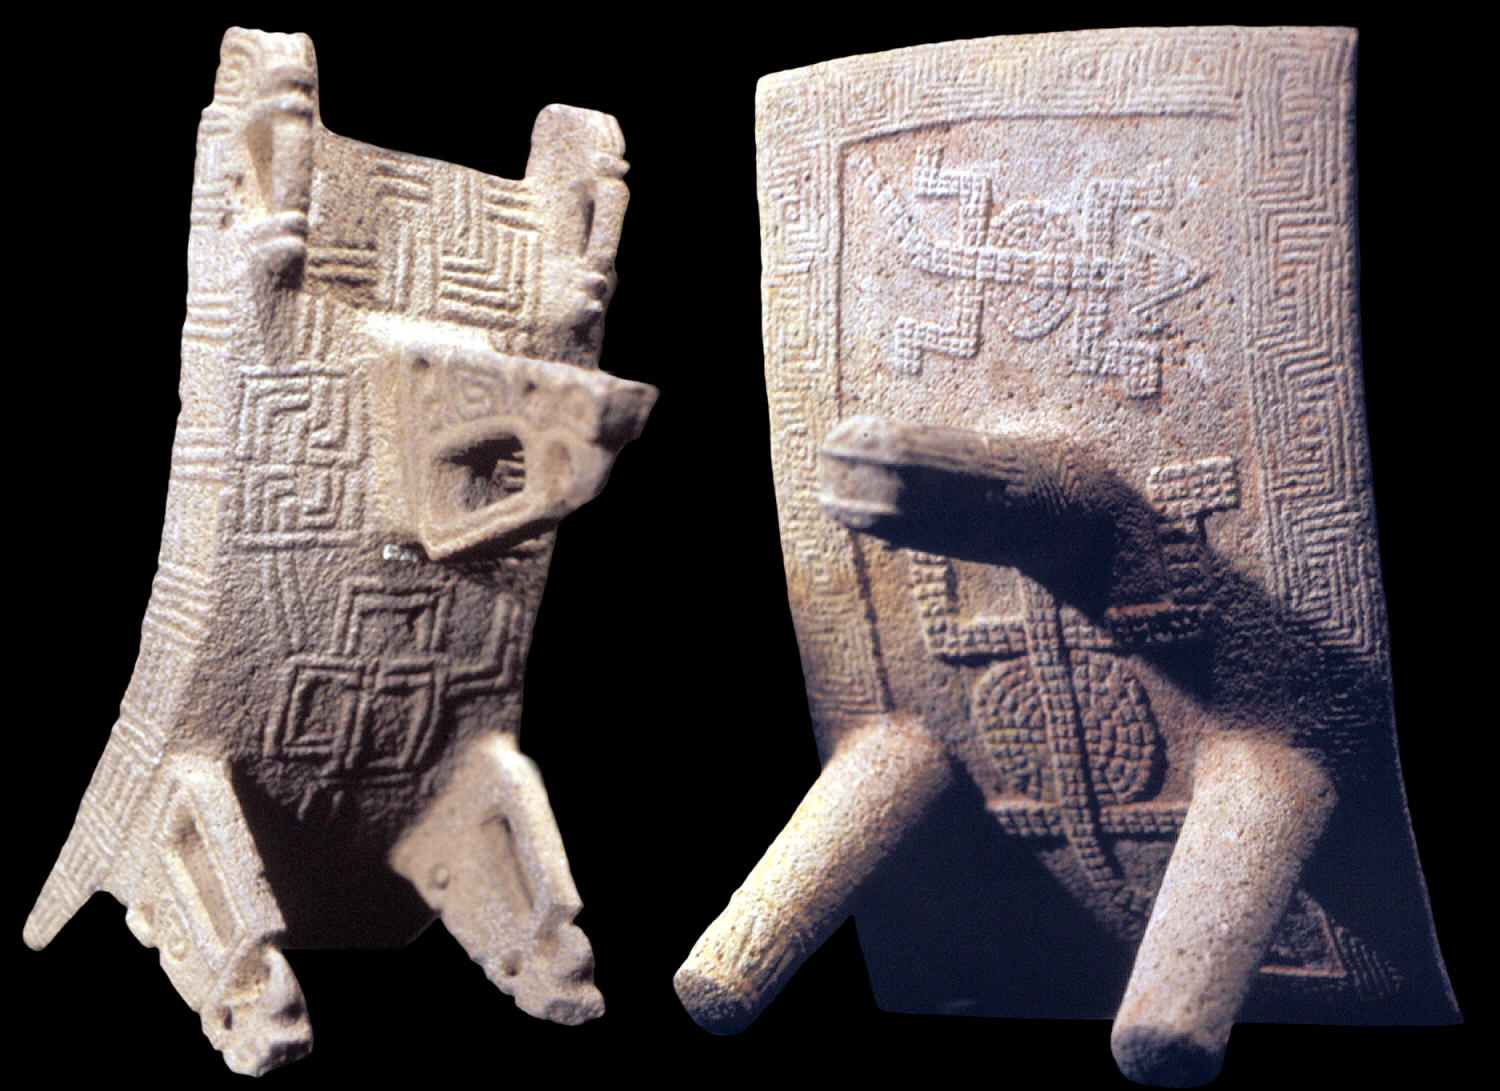 Carved designs on  legs & grinding plates of metates.